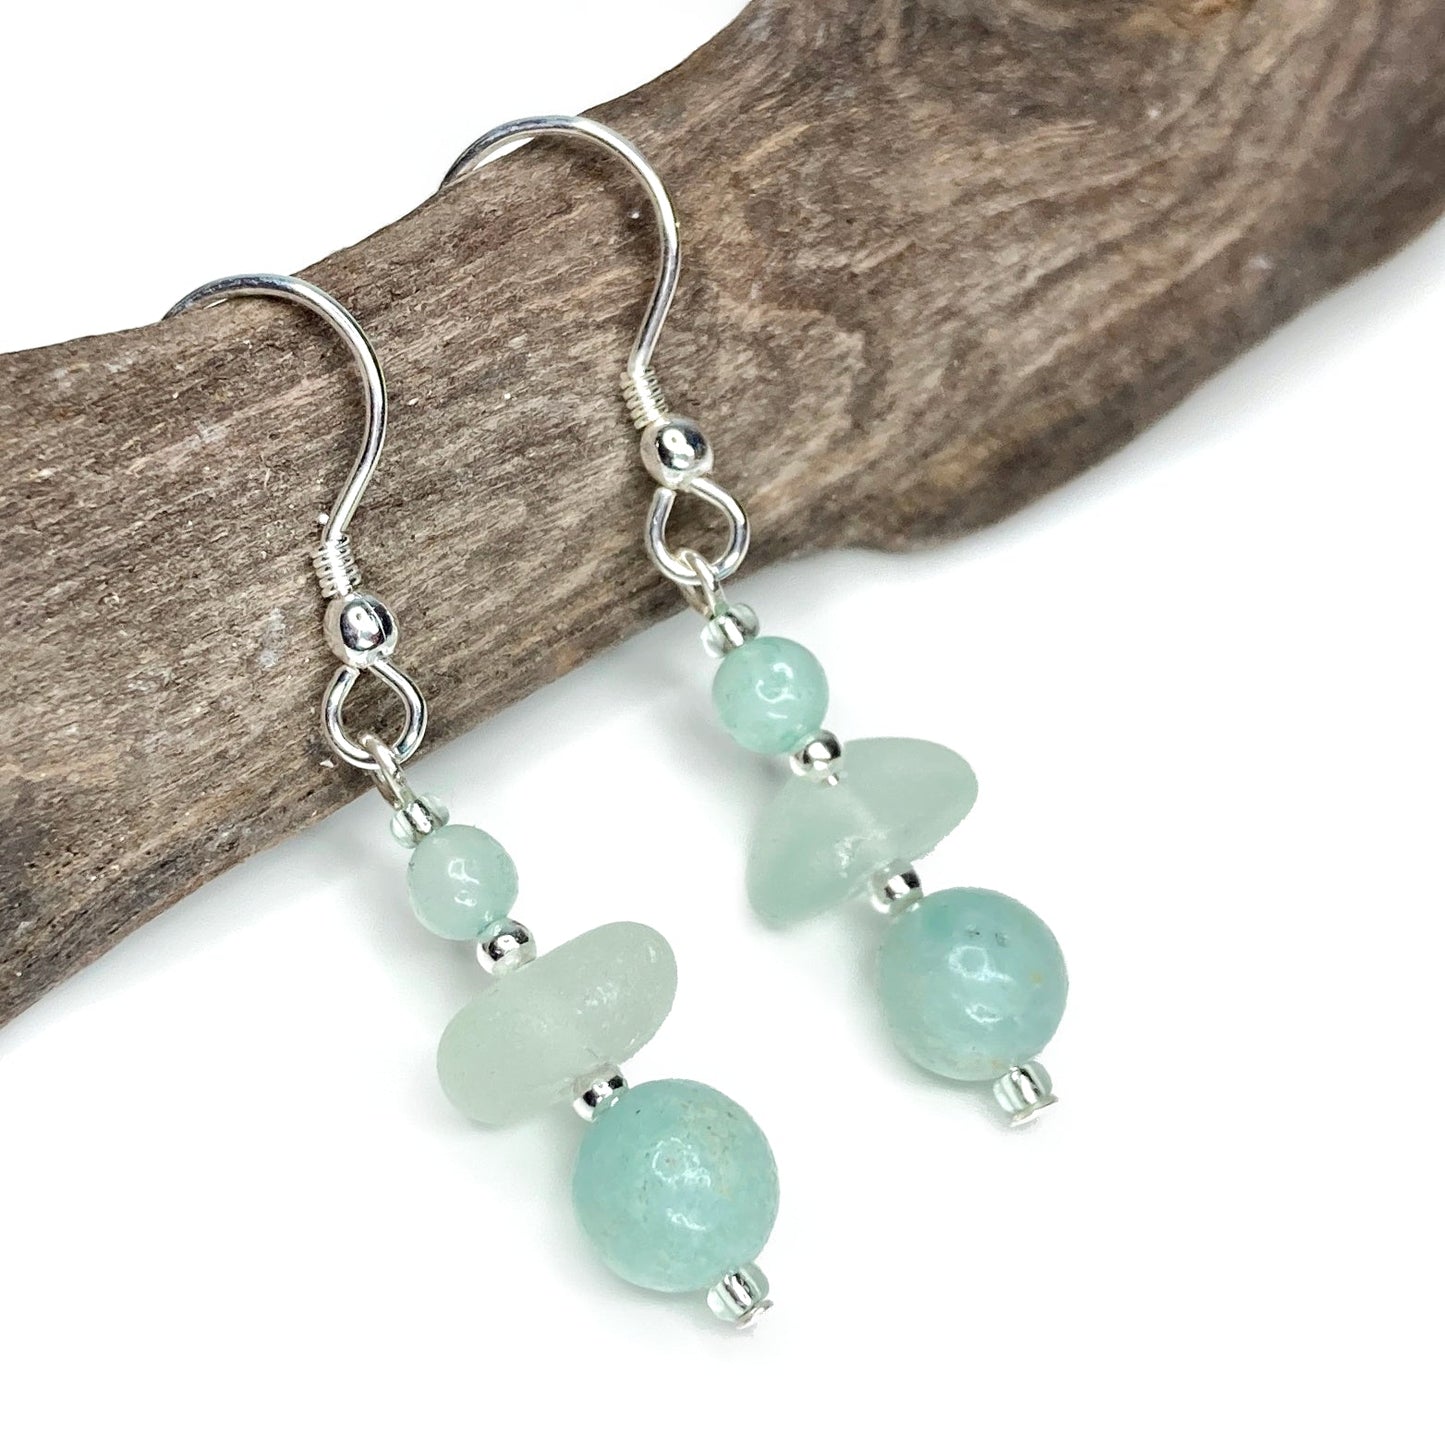 Green Sea Glass Earrings - Sterling Silver Beaded Earrings with Amazonite Crystal - East Neuk Beach Crafts